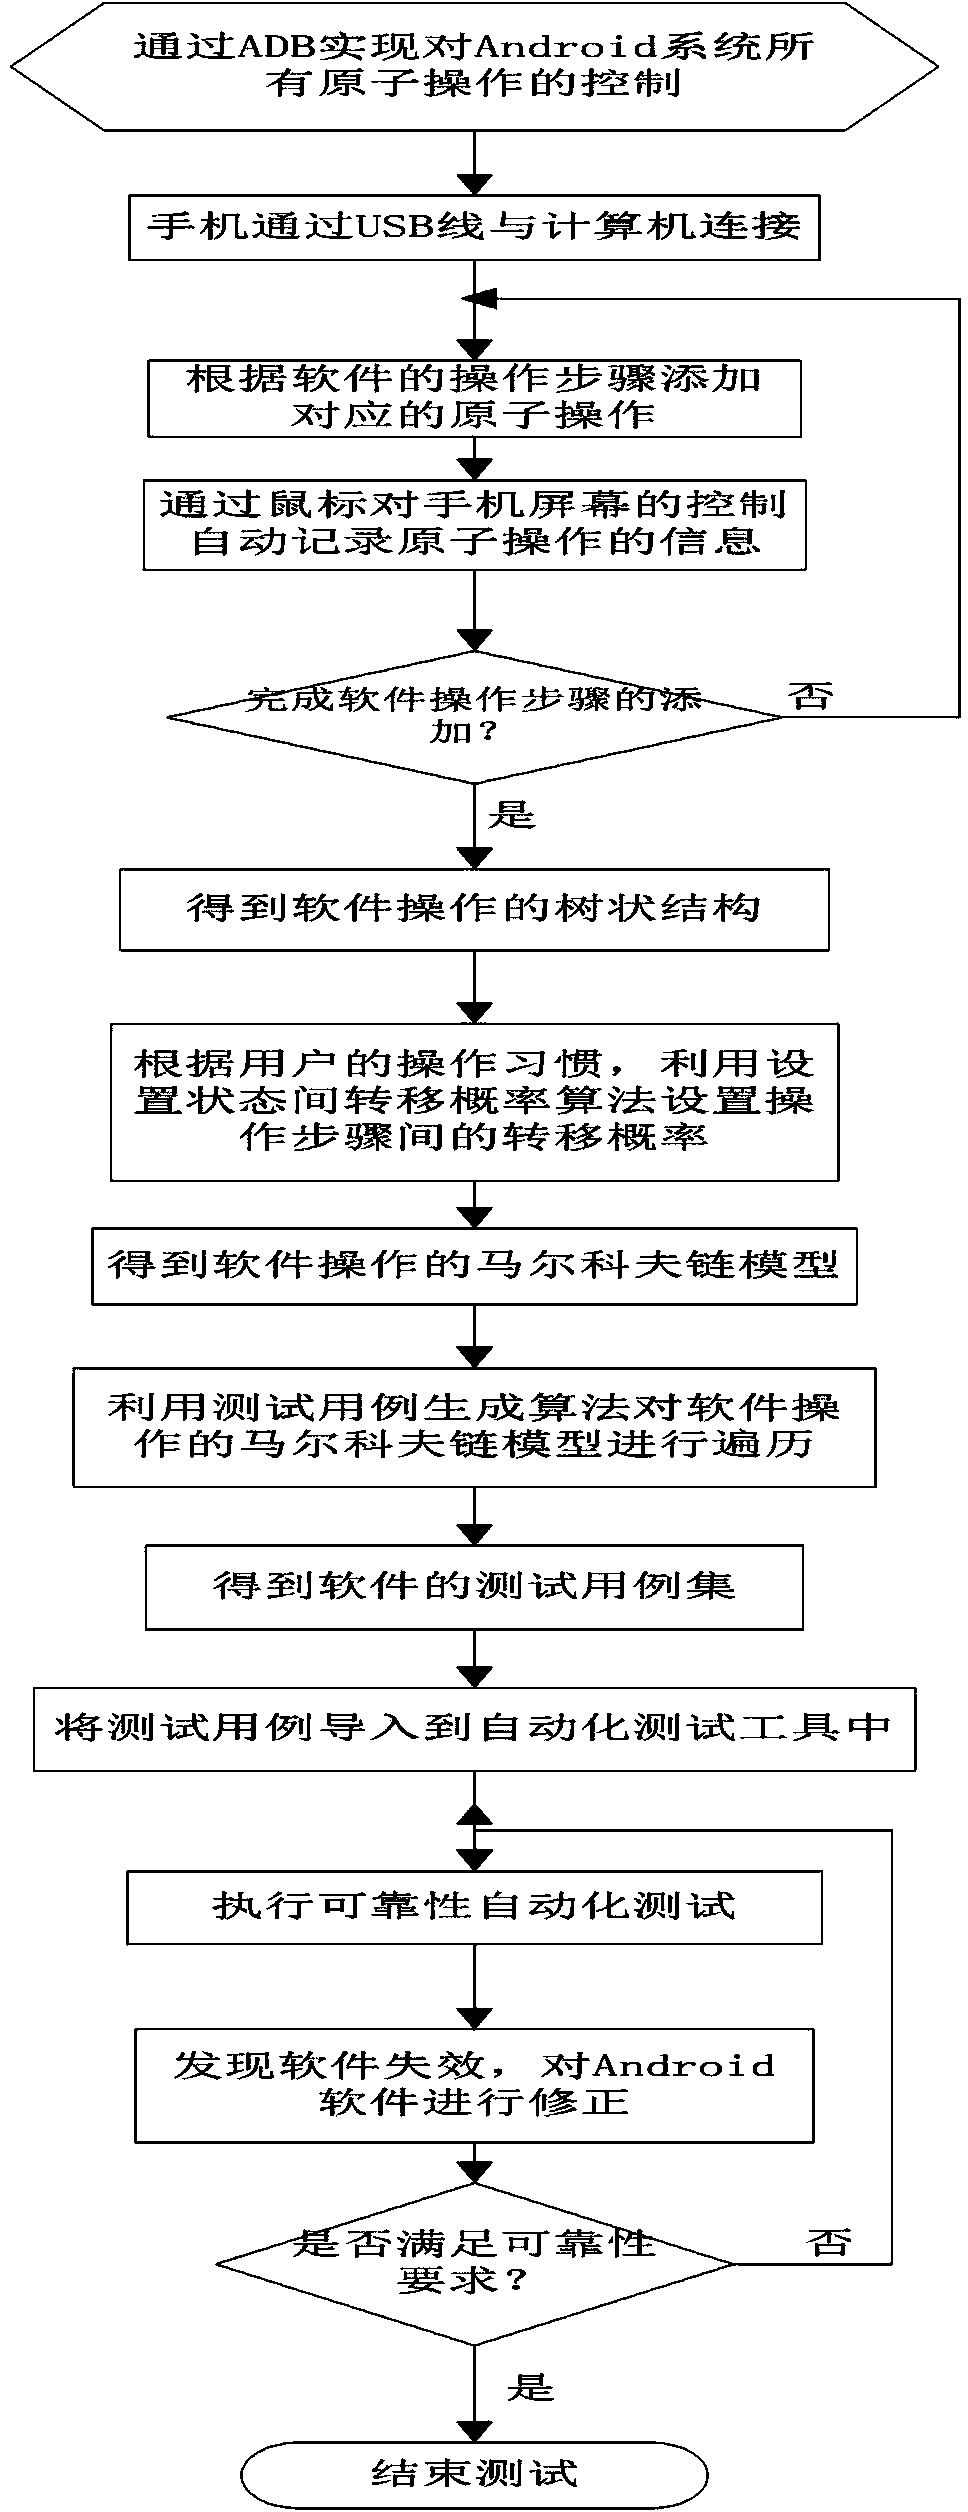 Method for testing reliability of Android mobile phone software